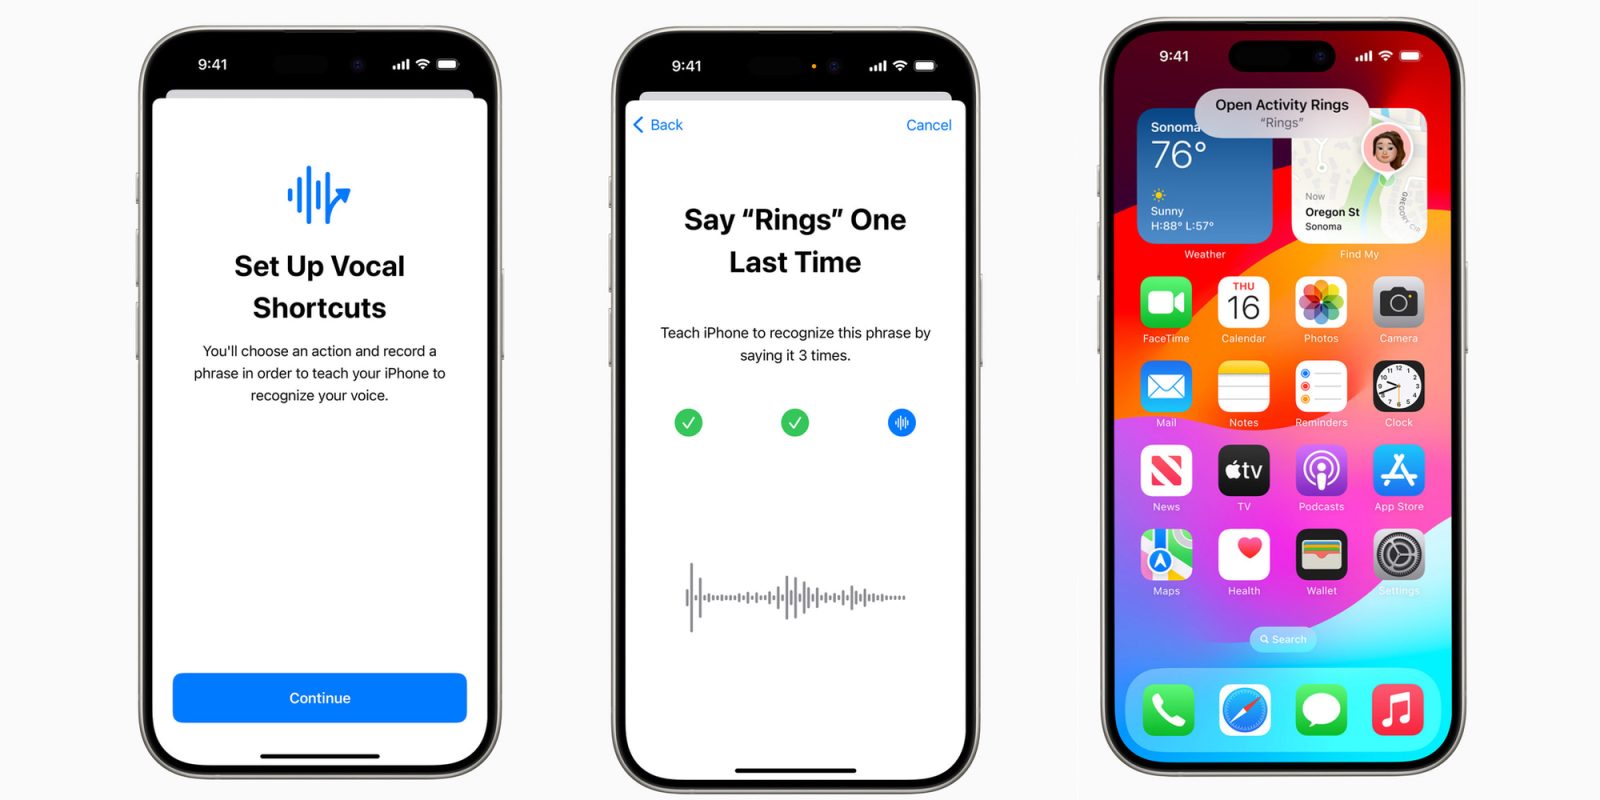 iOS 18 will let you set custom voice phrases to trigger actions, no ‘Siri’ necessary